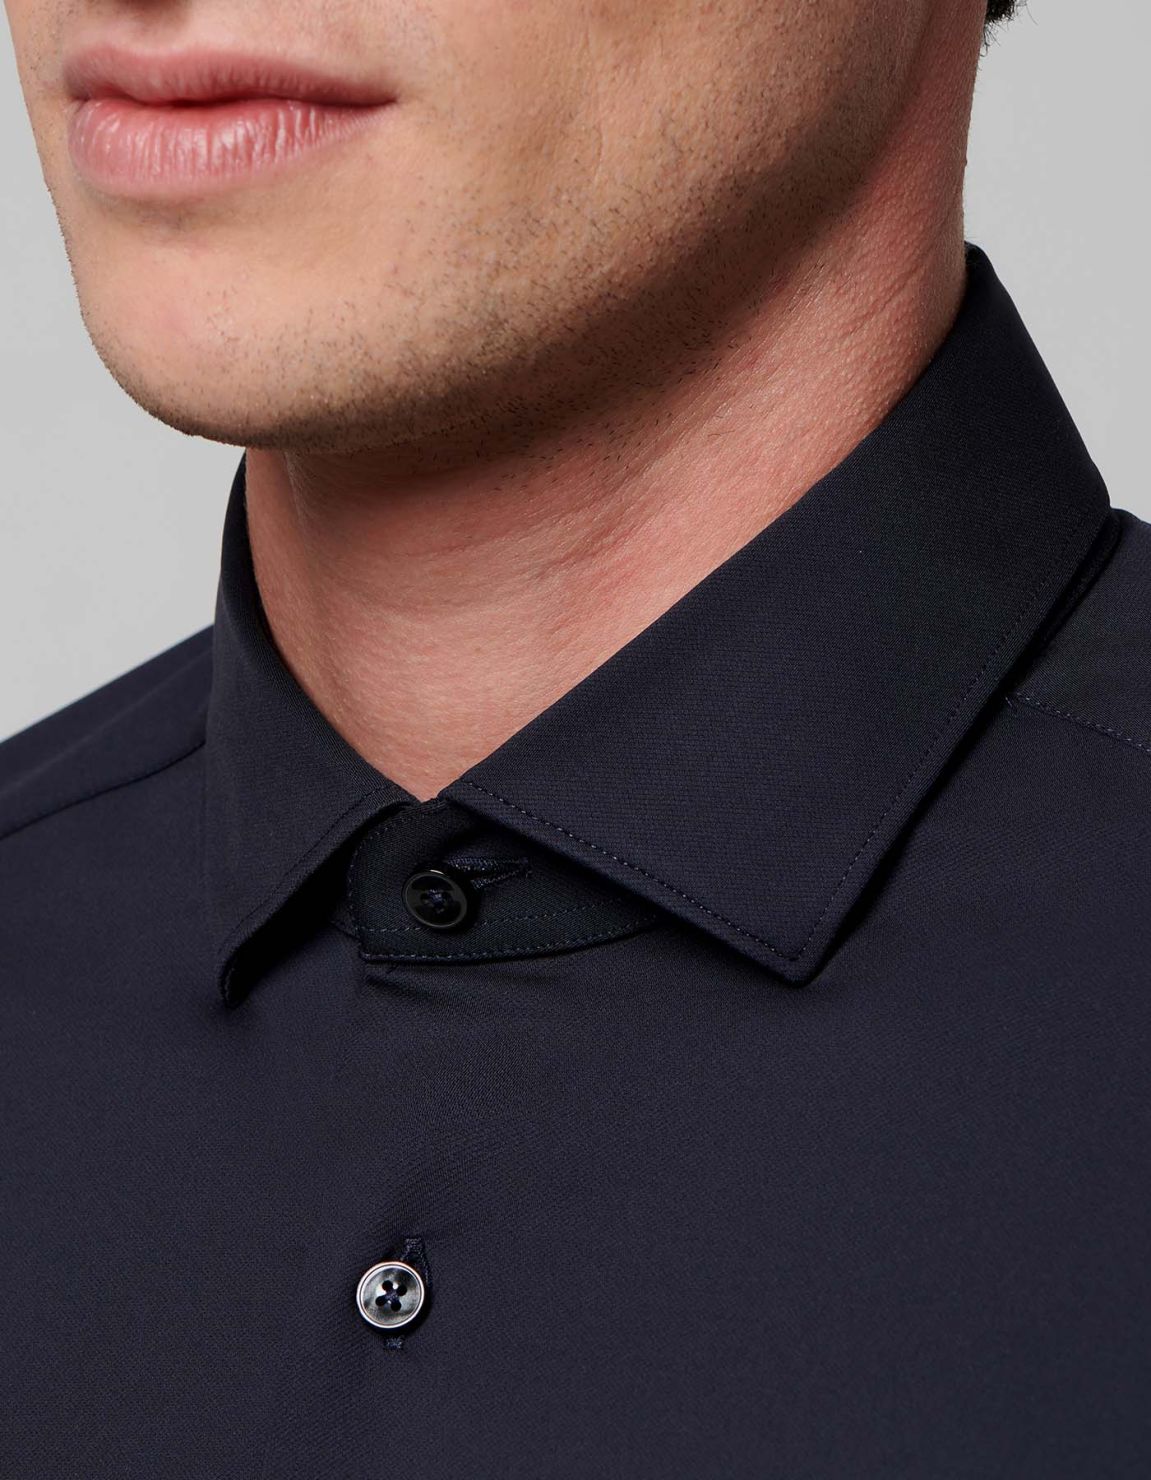 Navy Blue Textured Solid colour Shirt Collar small cutaway Evolution Classic Fit 3